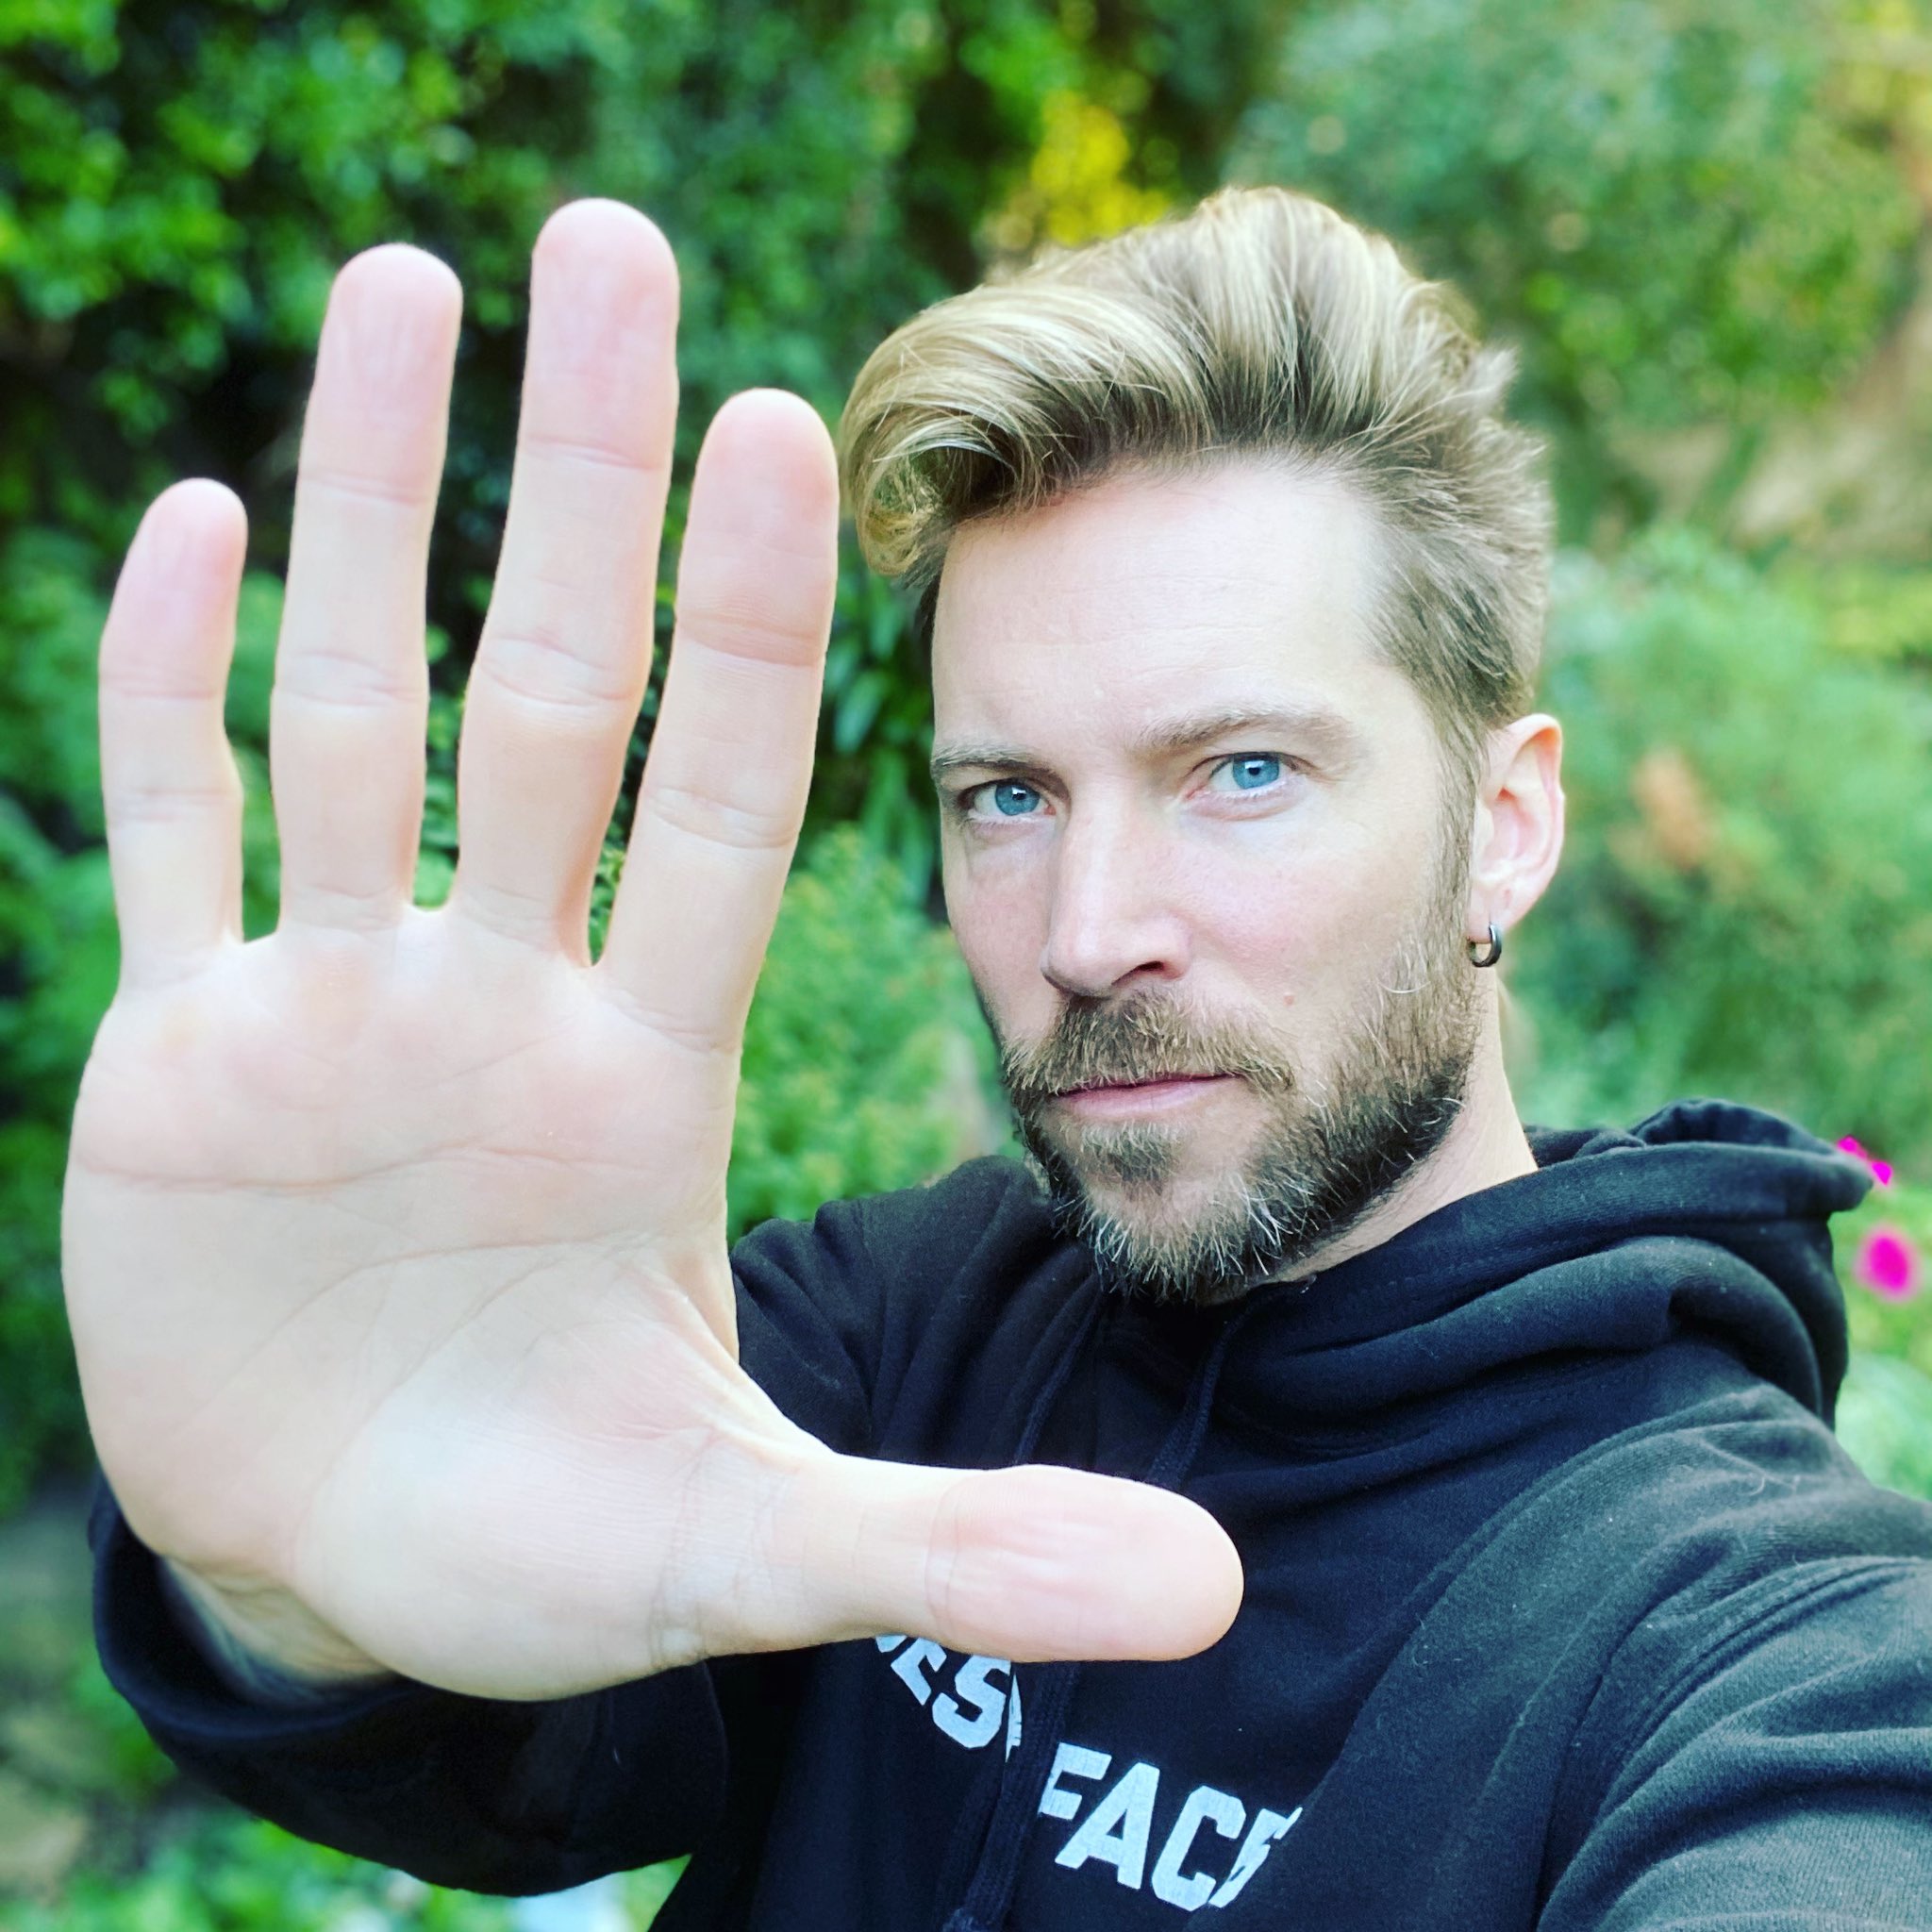 Troy Baker on X: Happy birthday, #DeathStranding Here's a “High 5” from  Higgs. Thank you, @HIDEO_KOJIMA_EN for allowing me to be a part of such an  ambitious piece of art. Stay connected